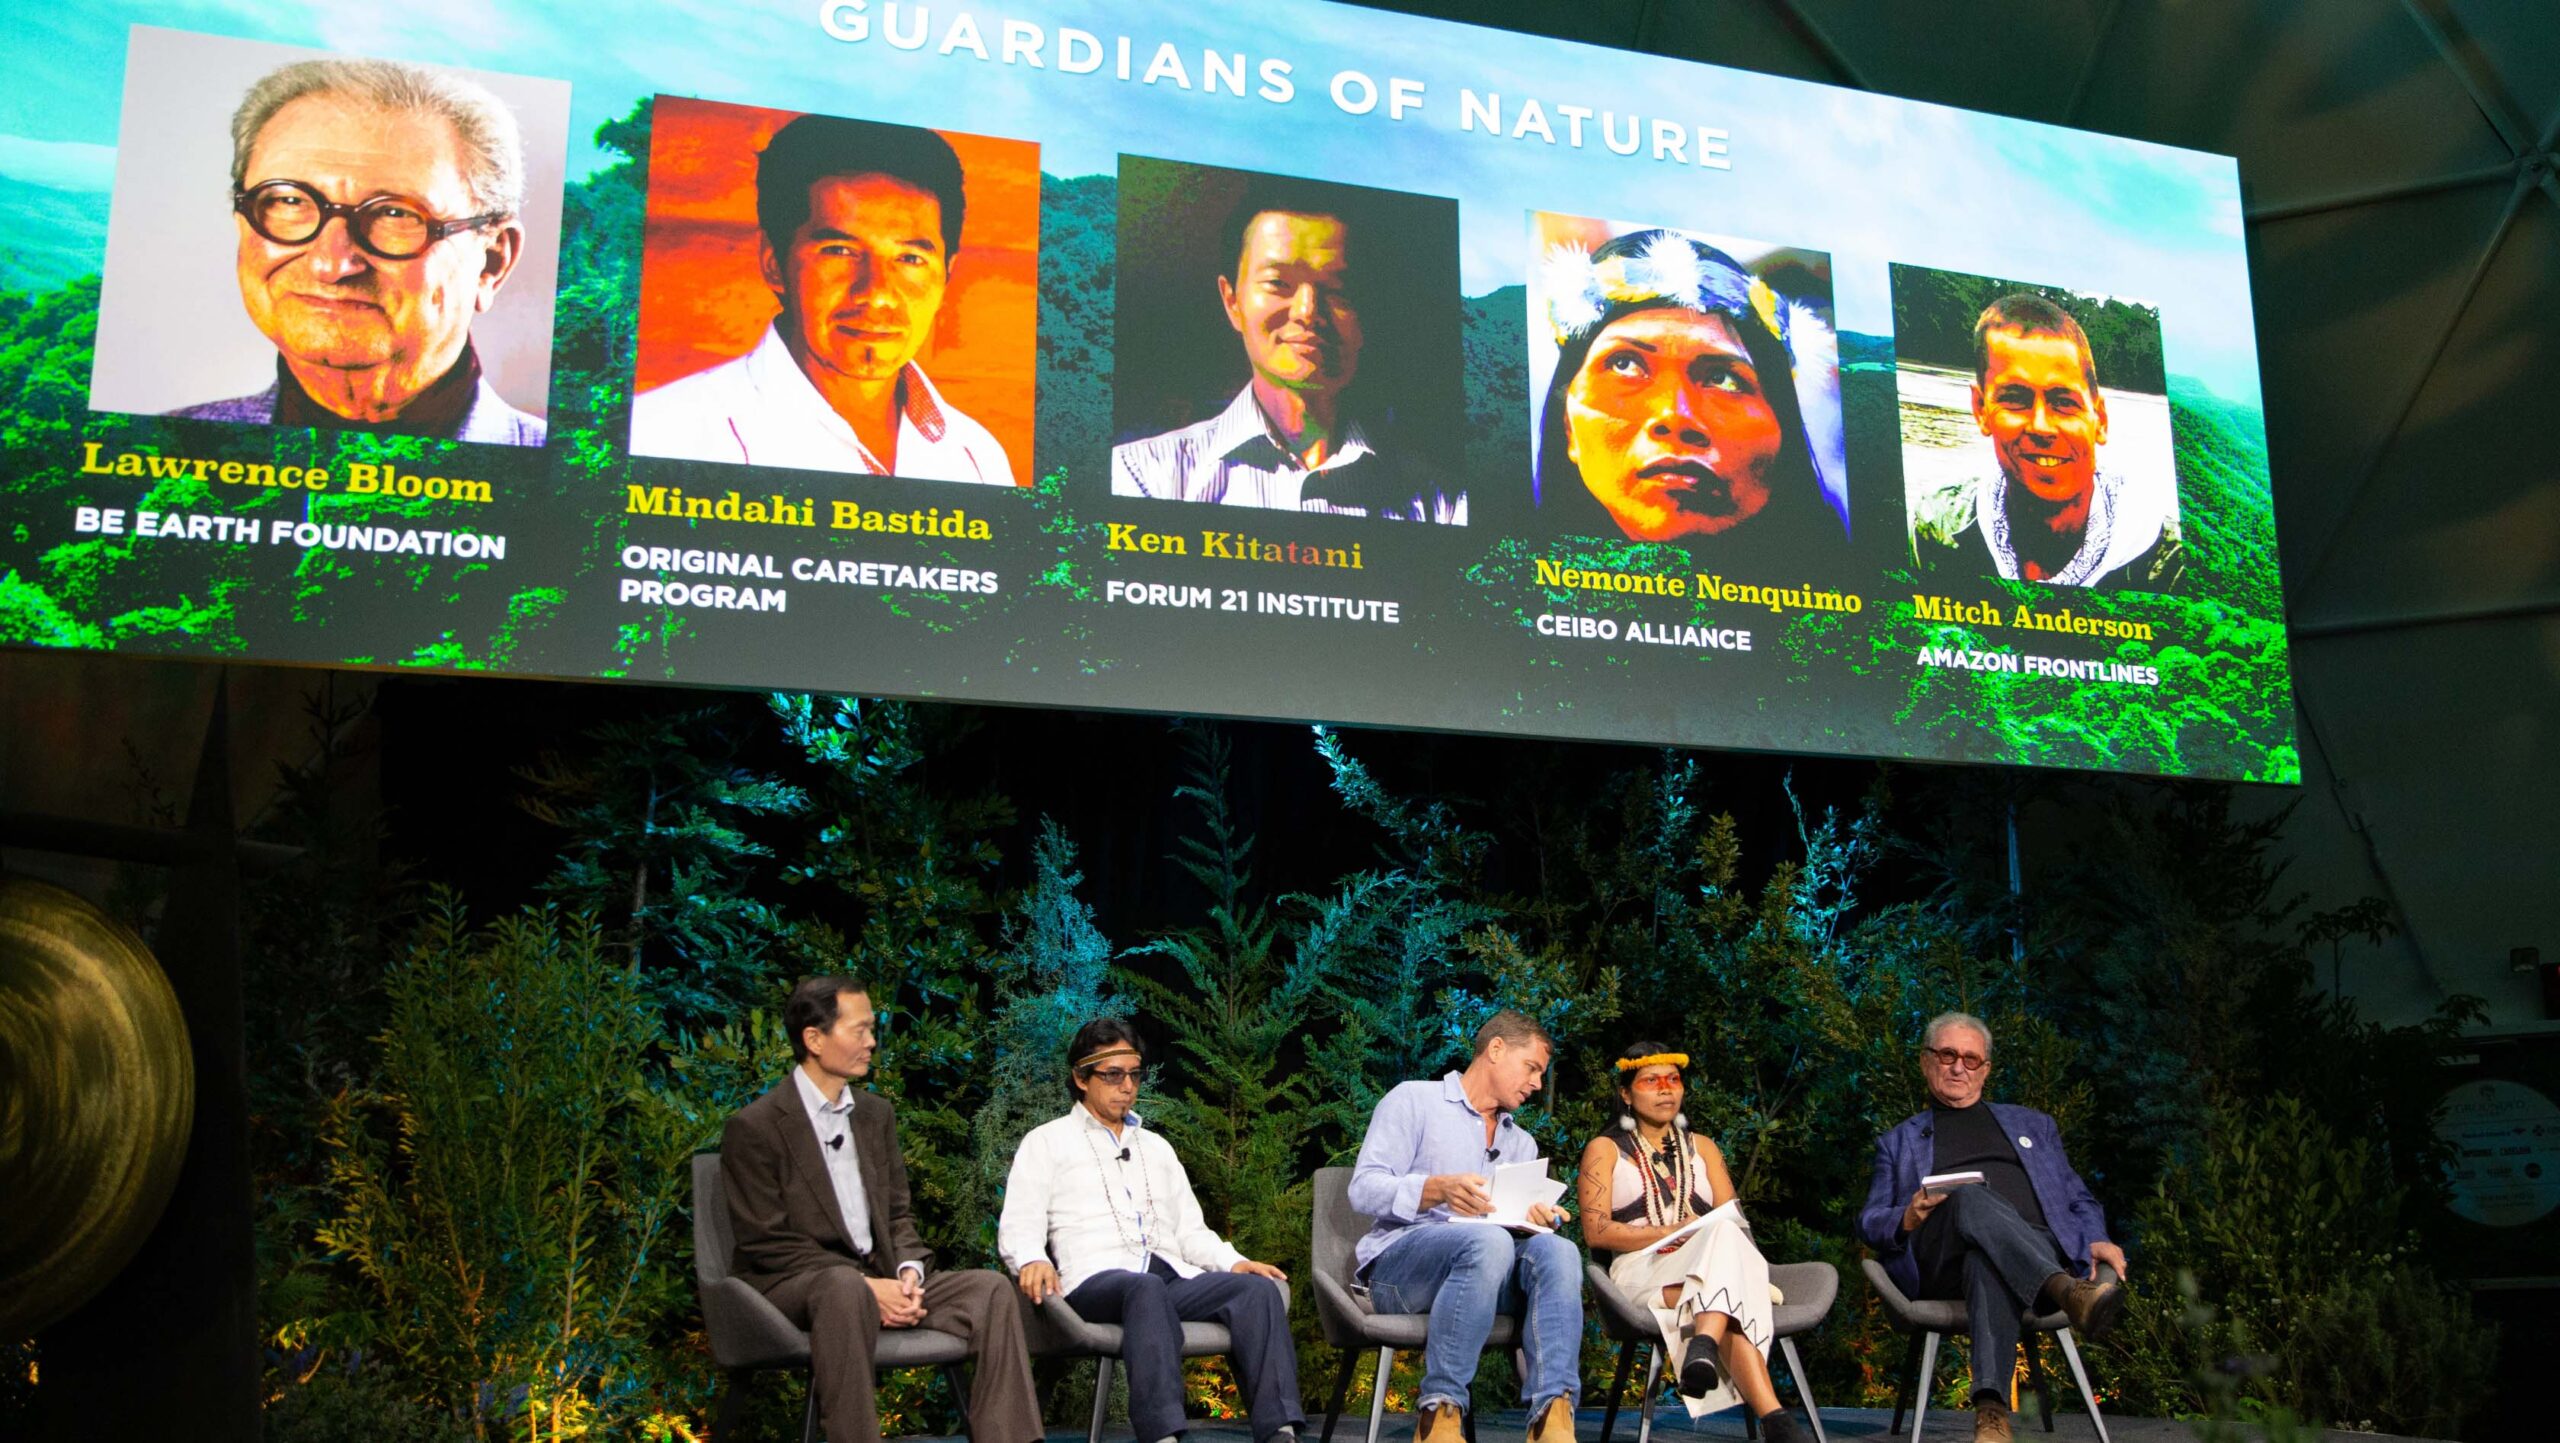 Lawrence Bloom, Mindahi Bastida, Ken Kitatani, Nemonte Nenquimo and Mitch Anderson speaking on stage at the Grounded Summit